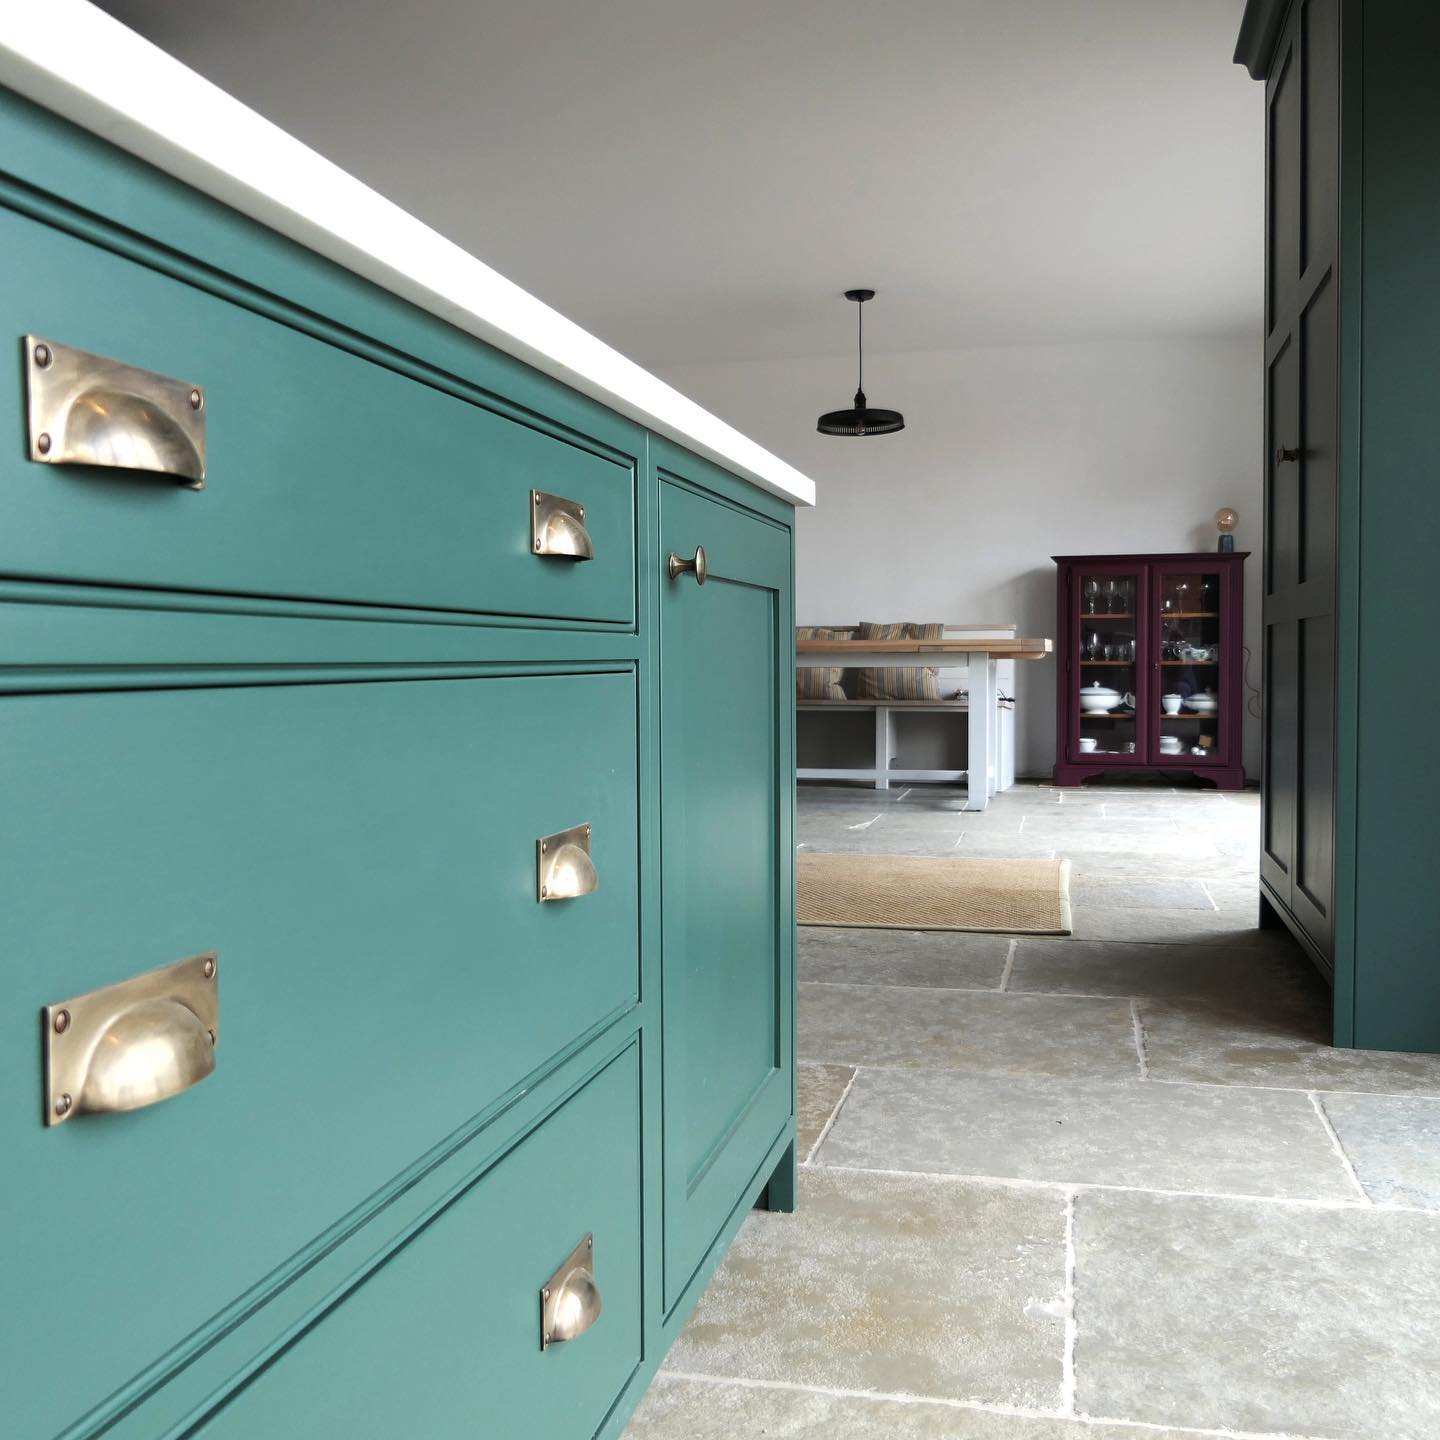 Injecting colour in your interiors to compliment your flagstone flooring